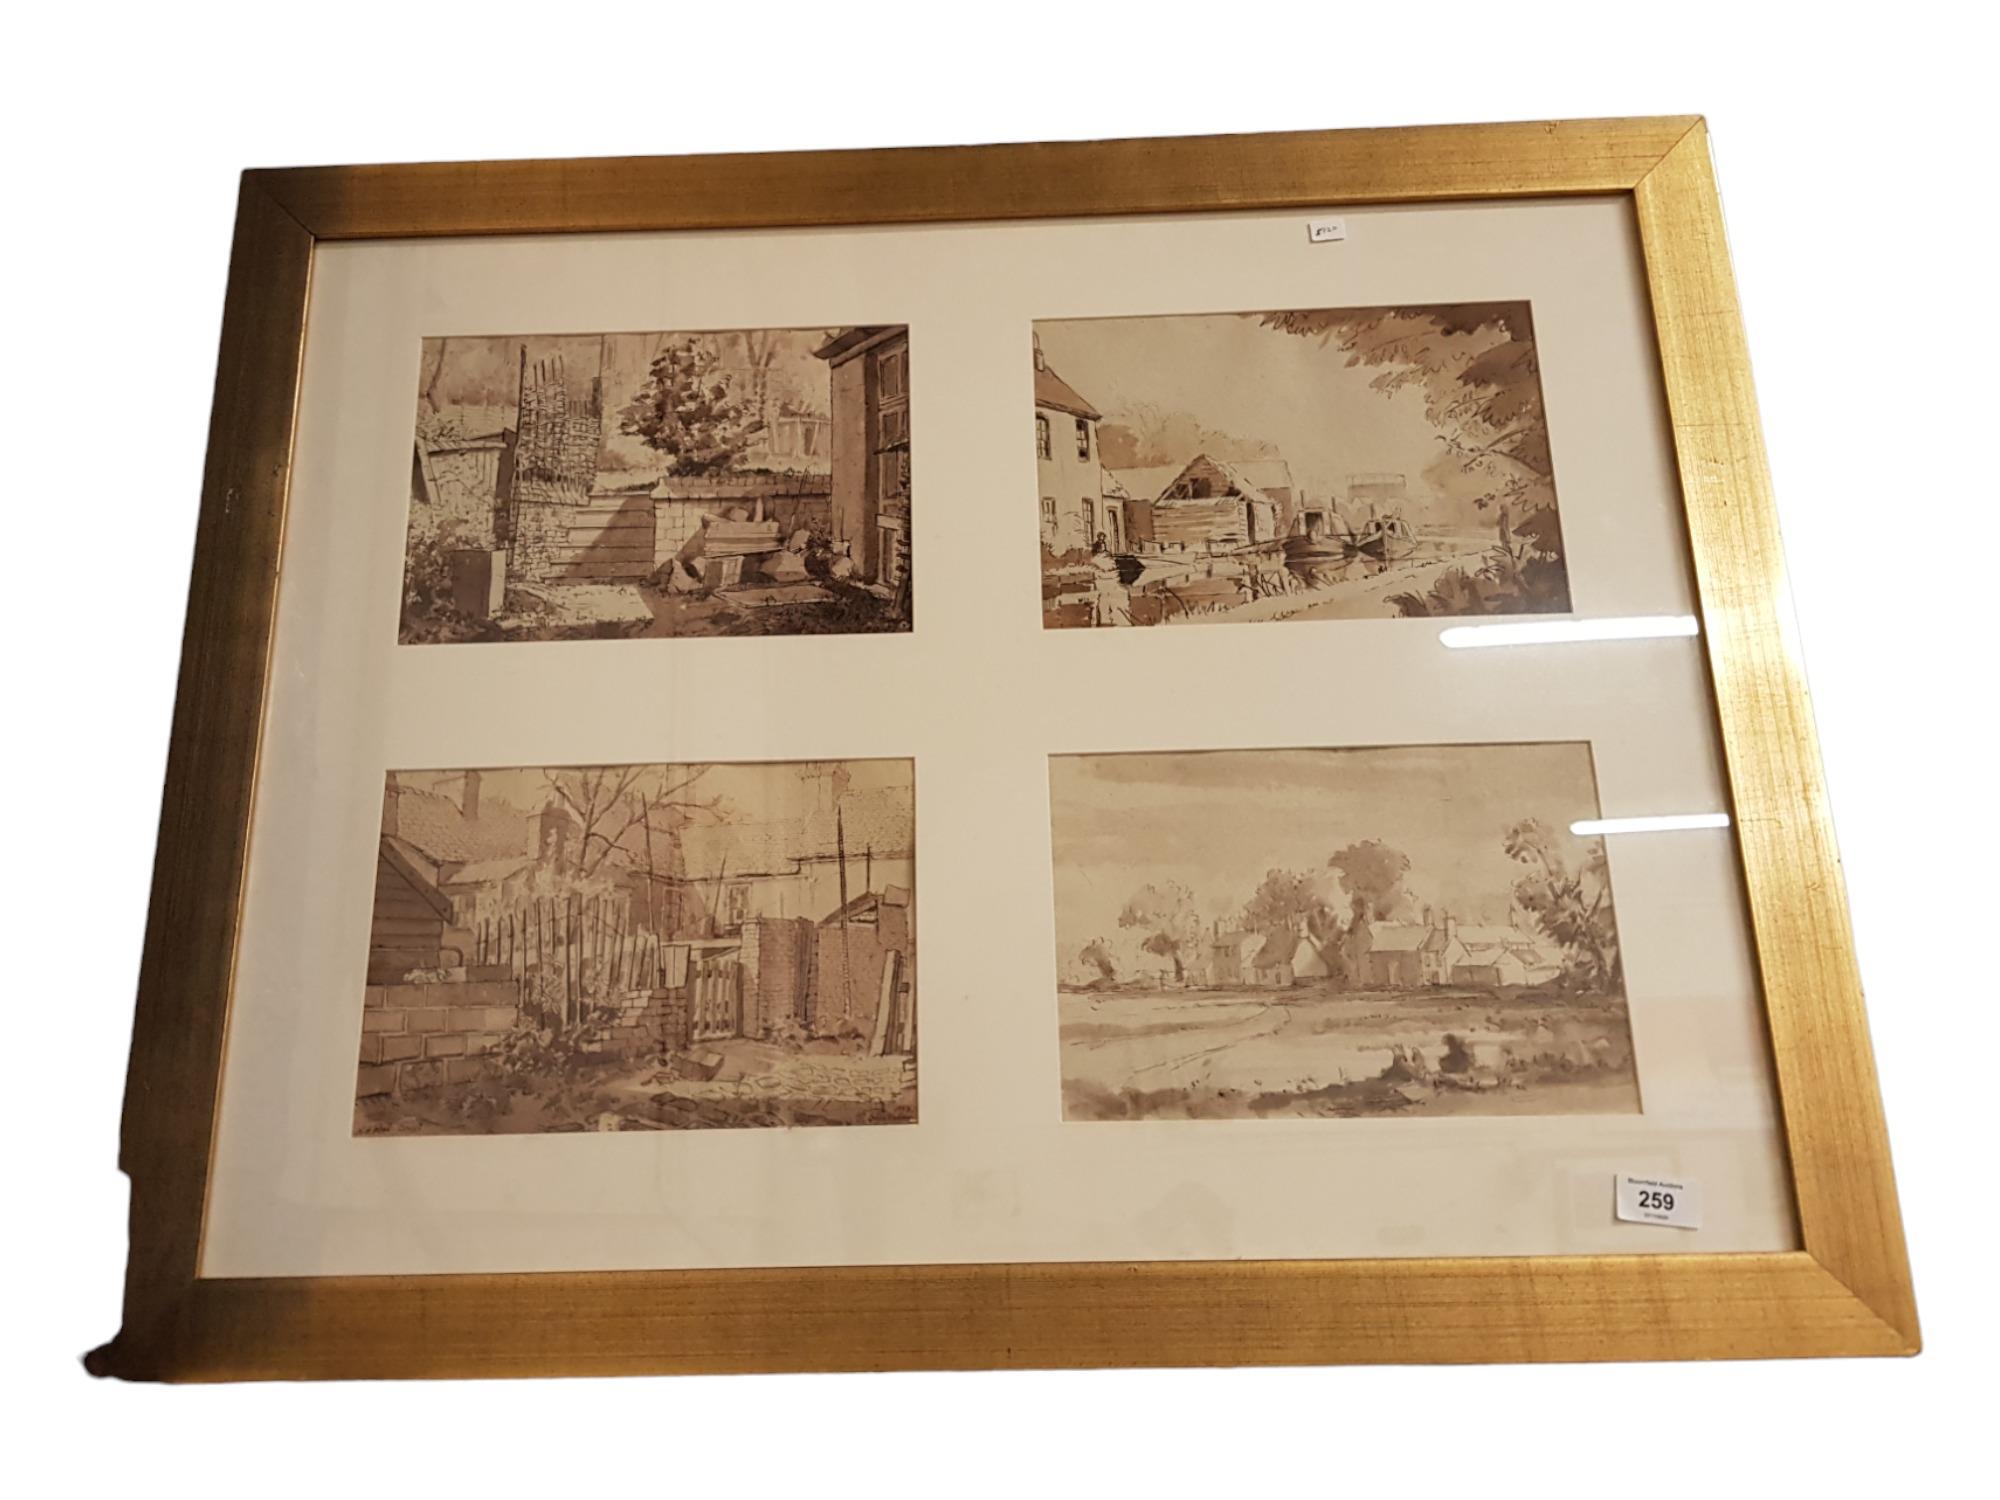 4 X FRAMED WATERCOLOURS BY FREDERICK STONHAM F.R.S.A